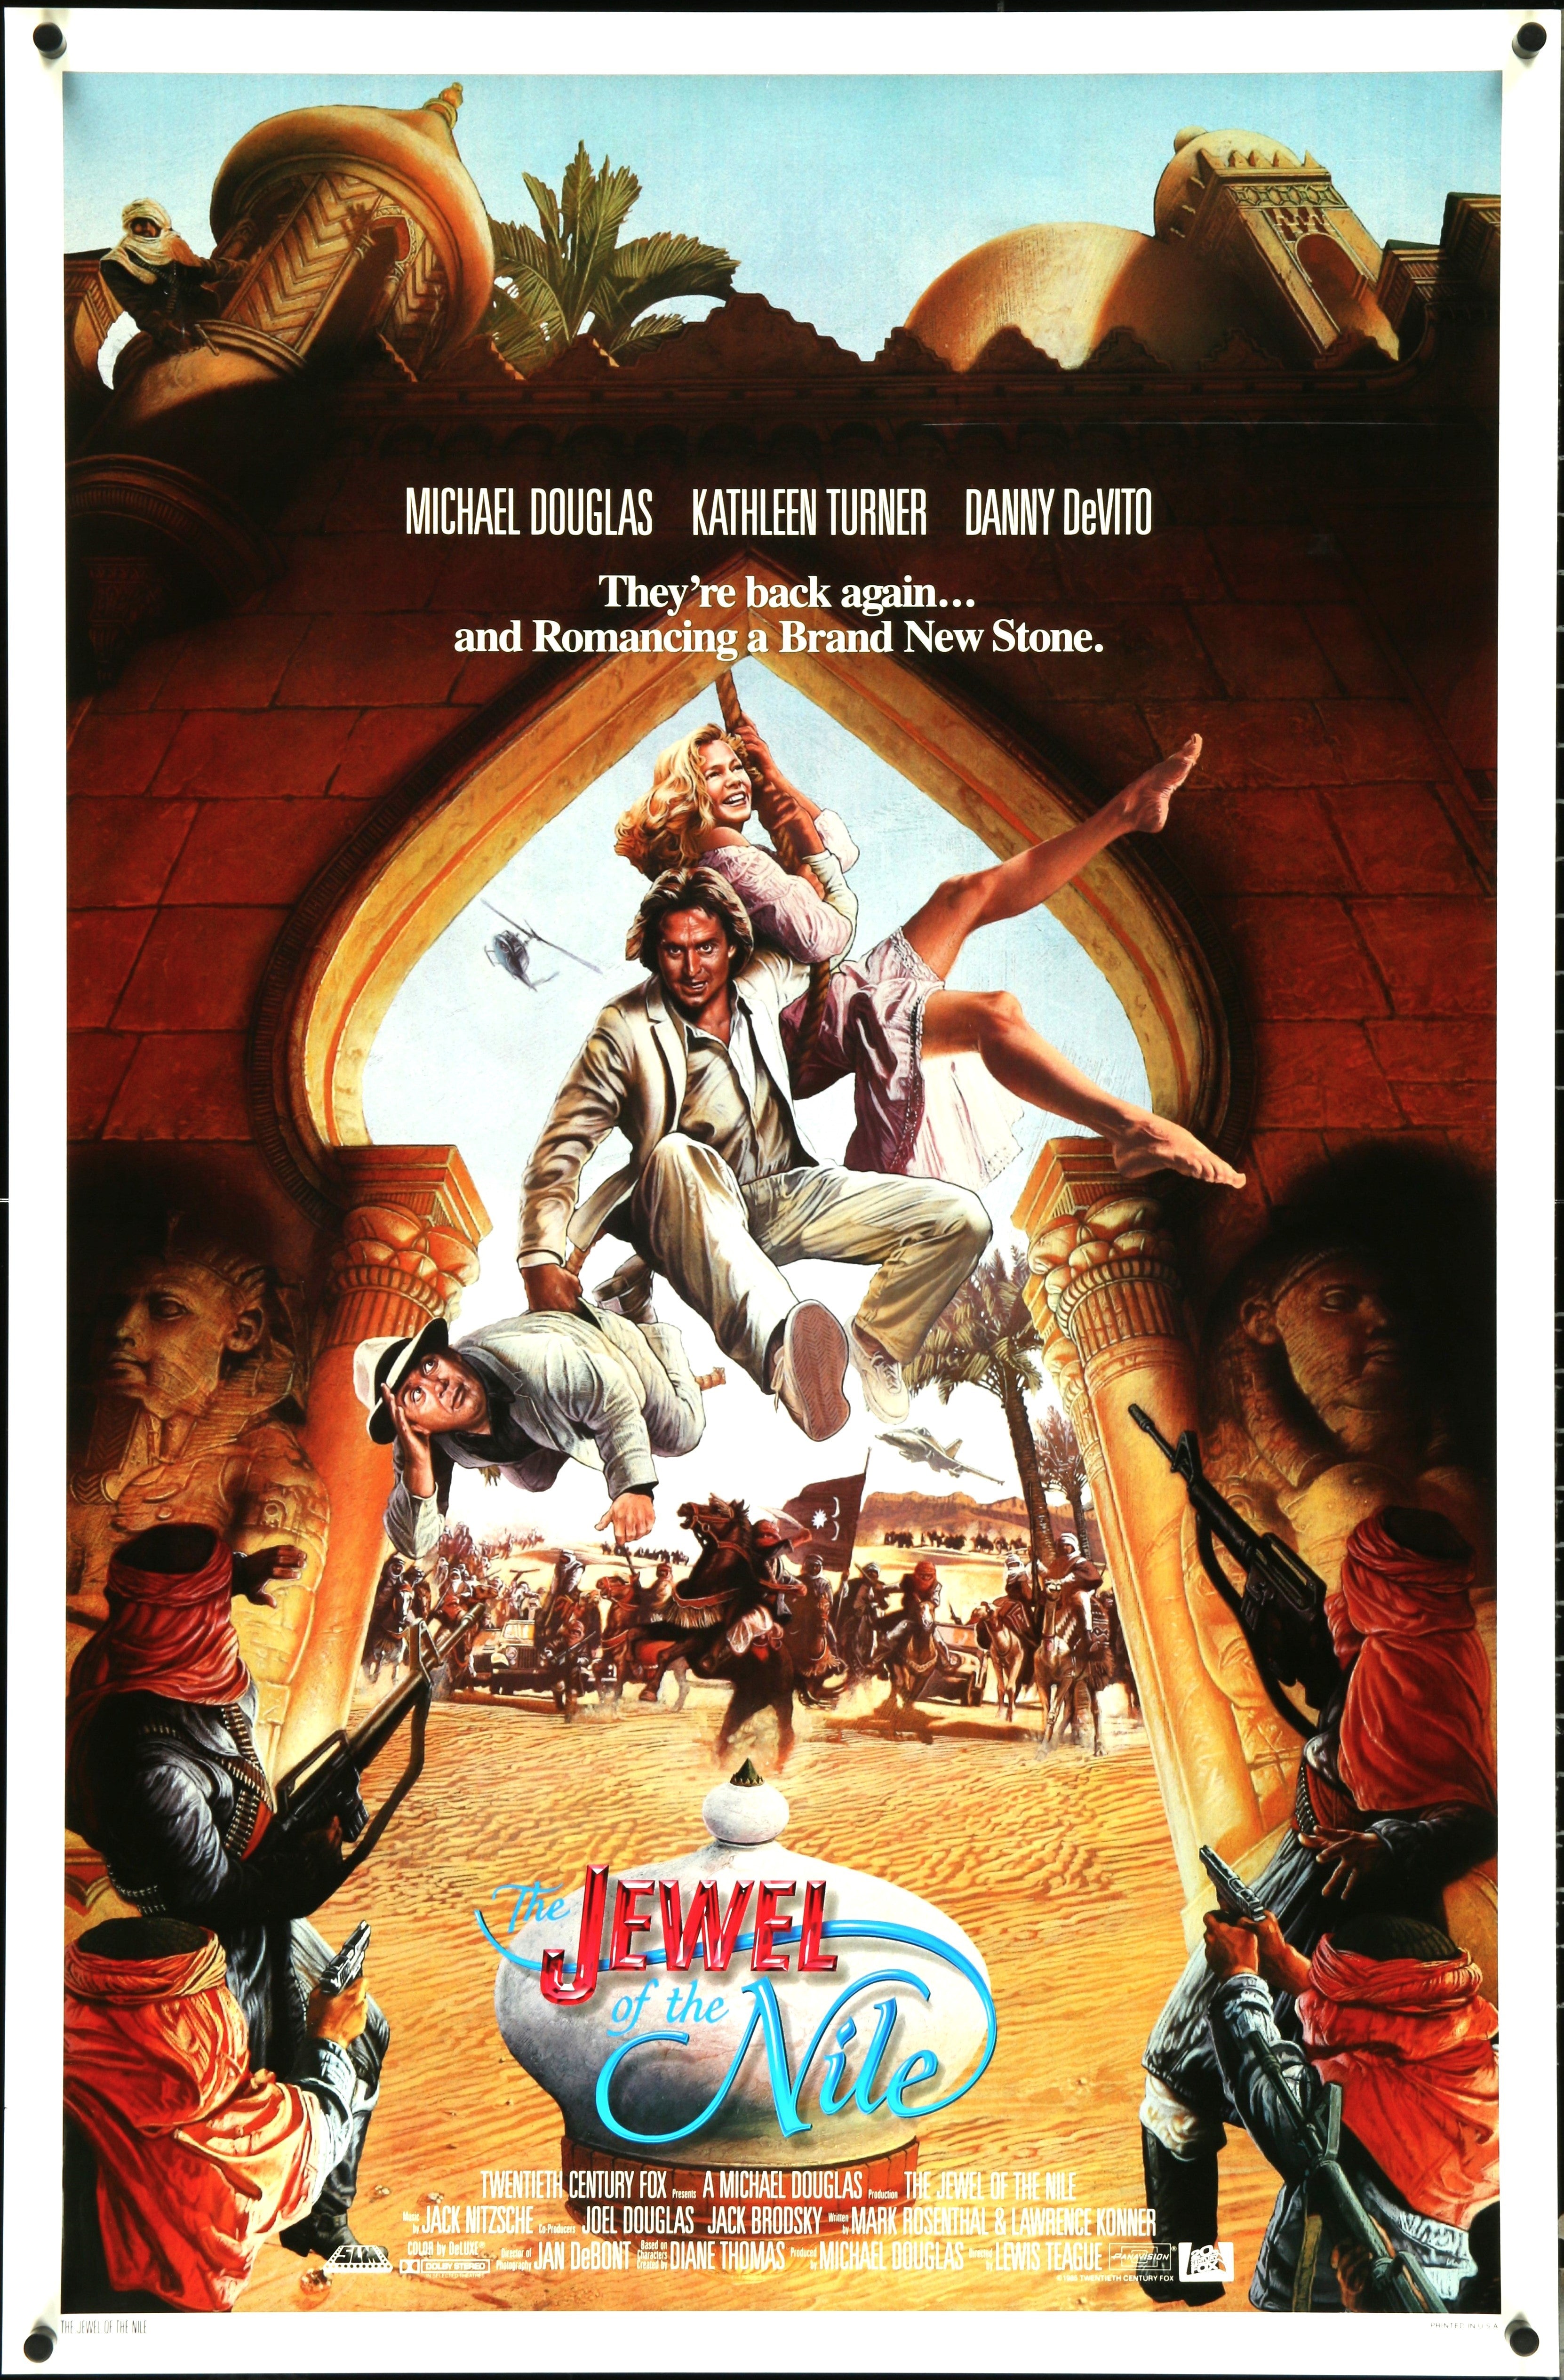 THE JEWEL OF THE NILE (1985)